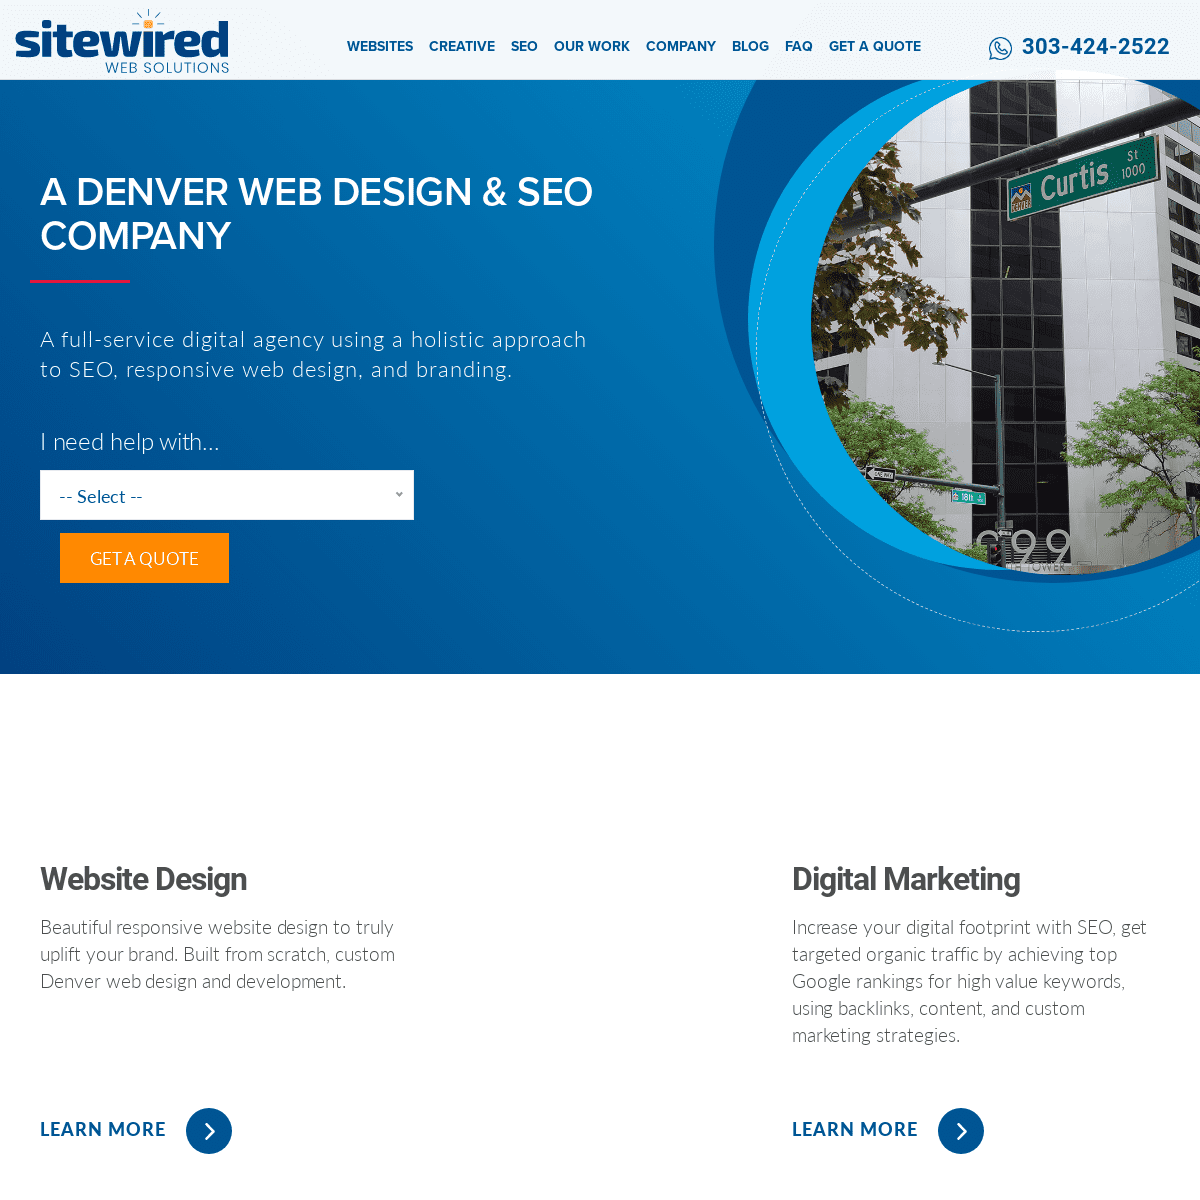 A complete backup of https://sitewired.com